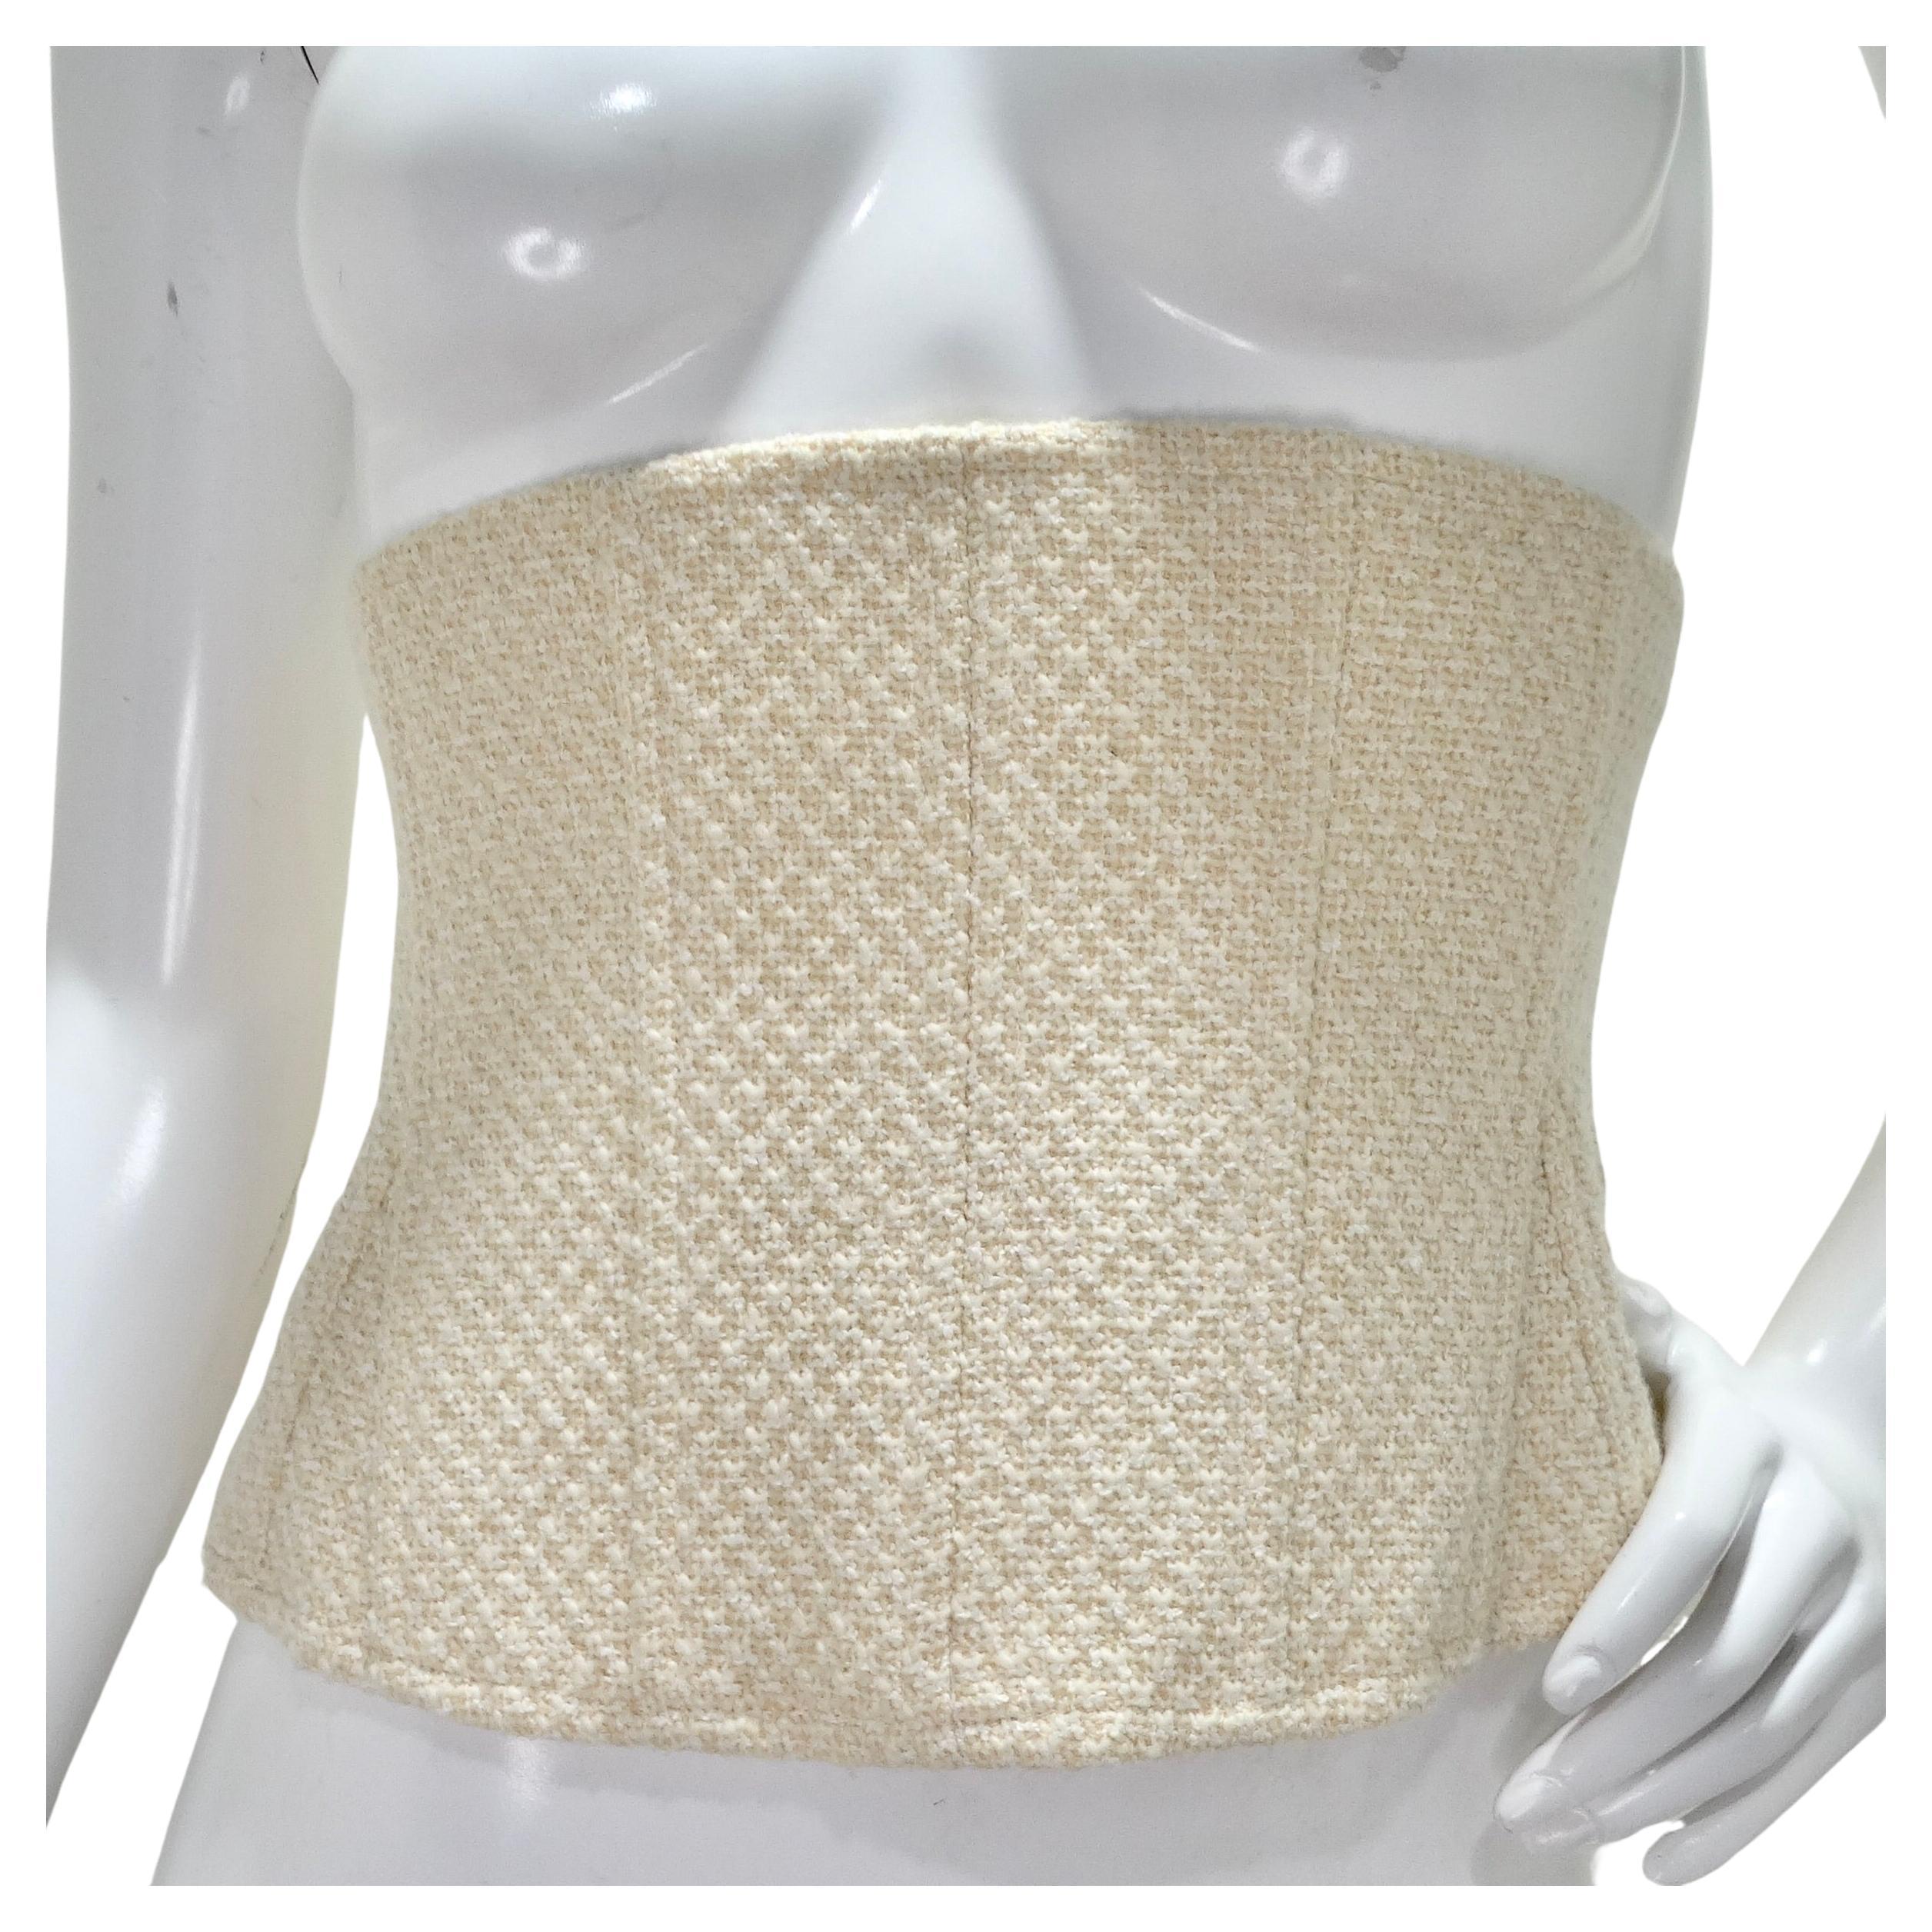 Introducing the Chanel Spring/Summer 1994 Tweed Corset Belt, a stunning and rare accessory that exudes timeless elegance and sophistication. Crafted from luxurious wool tweed in a classic ivory color, this corset belt is a chic and unique addition